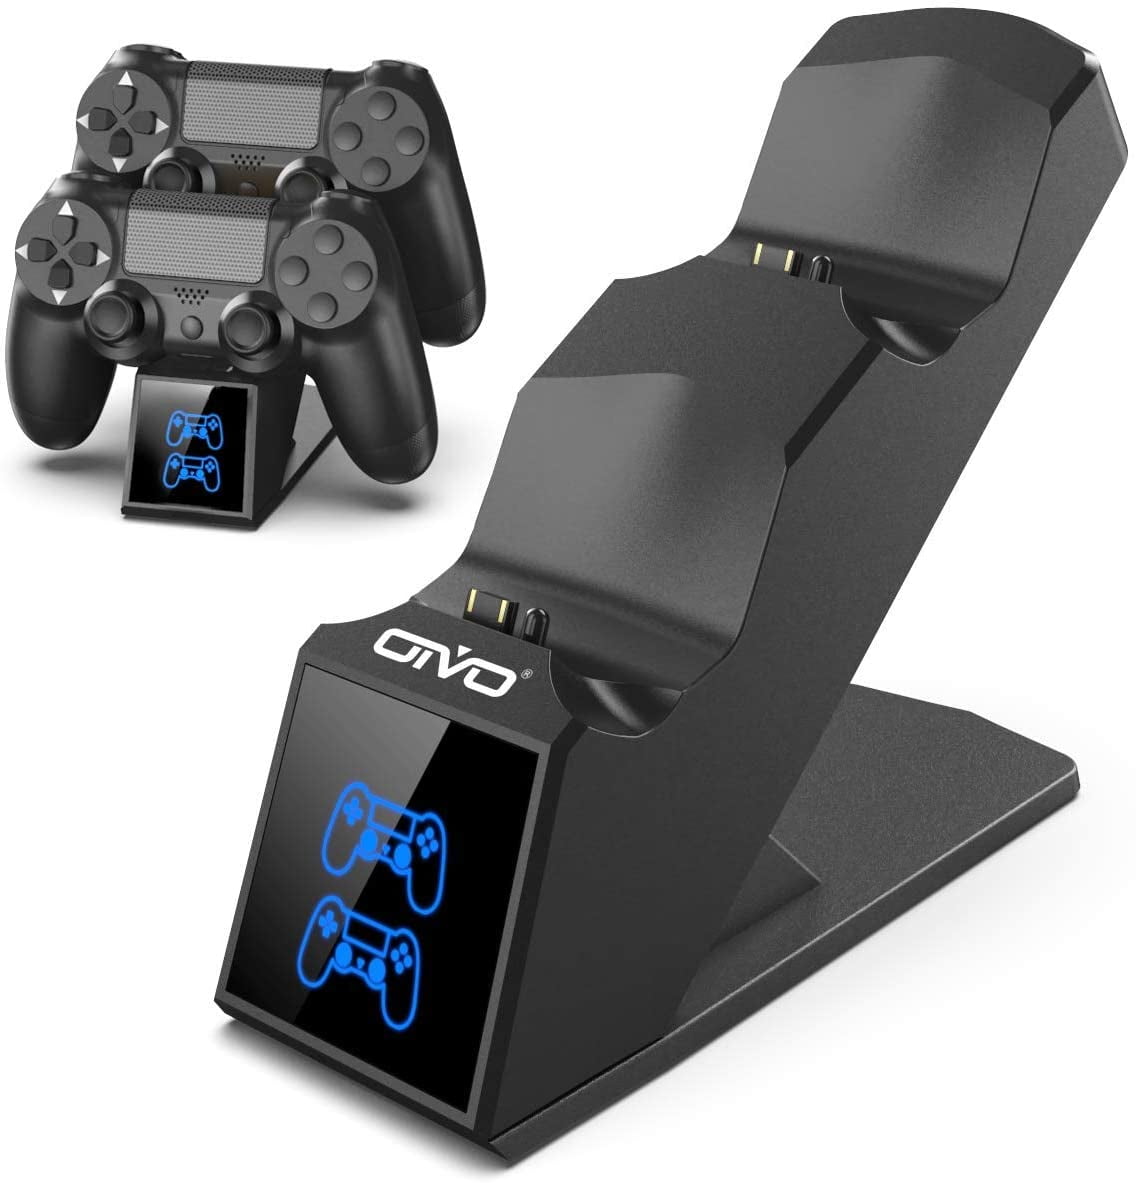 PS4 Controller Charger, OIVO DualShock 4 Controller Charging Station Dock  for Playstation 4/PS4/PS4 Slim/PS4 Pro, Dual Wireless PS4 Charging Dock -  